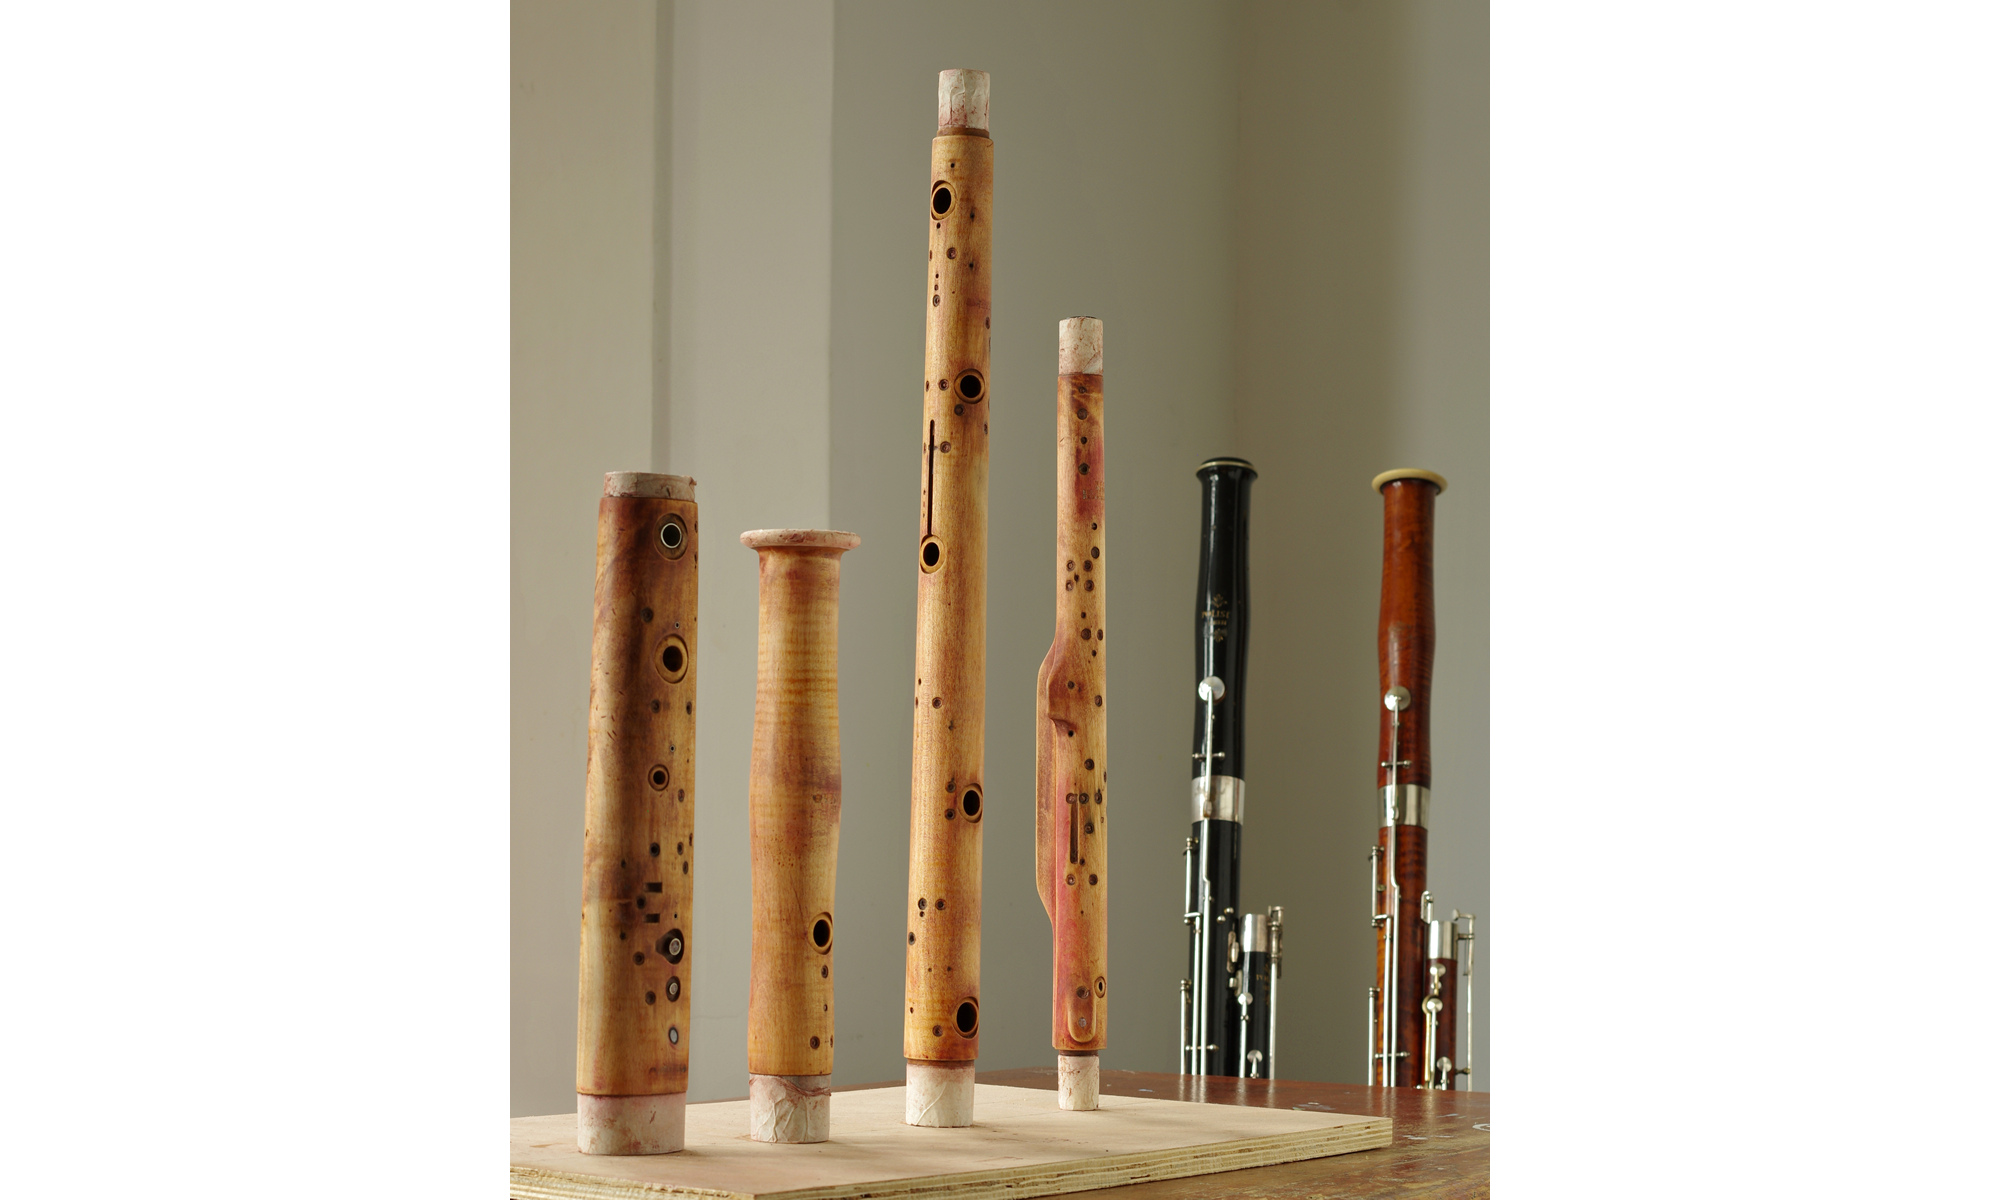 Pre-war bassoons for a wonderful tone | Double Reed Ltd